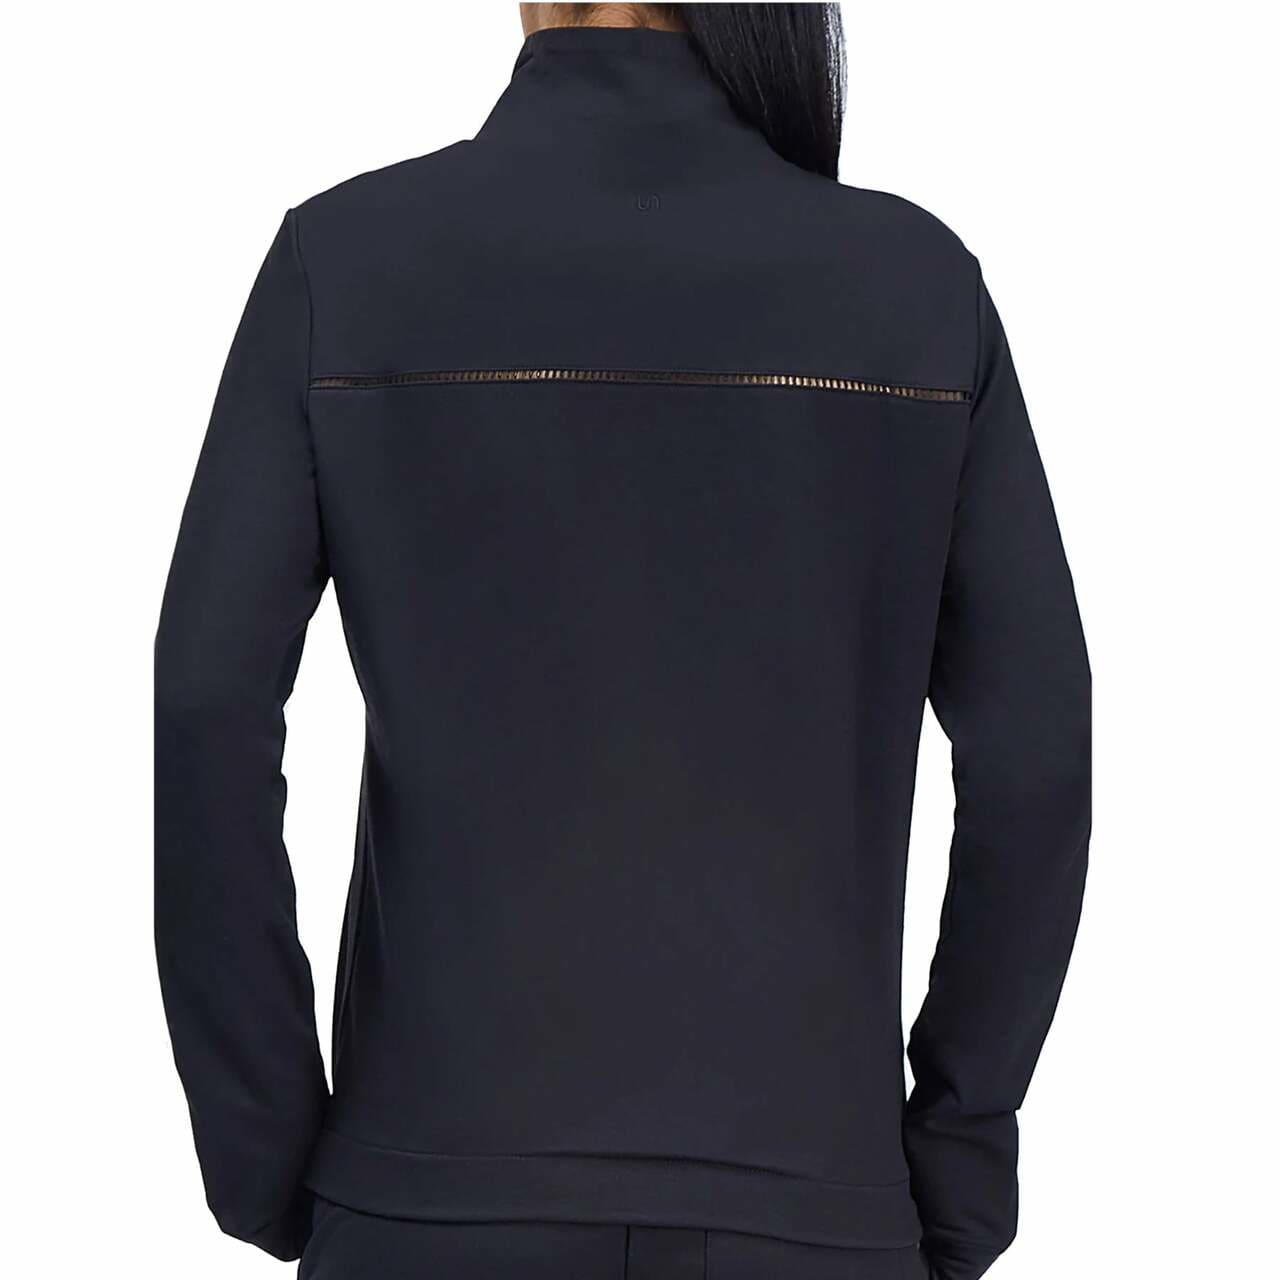 Urban Savage Laced Up Women's Pullover in Black